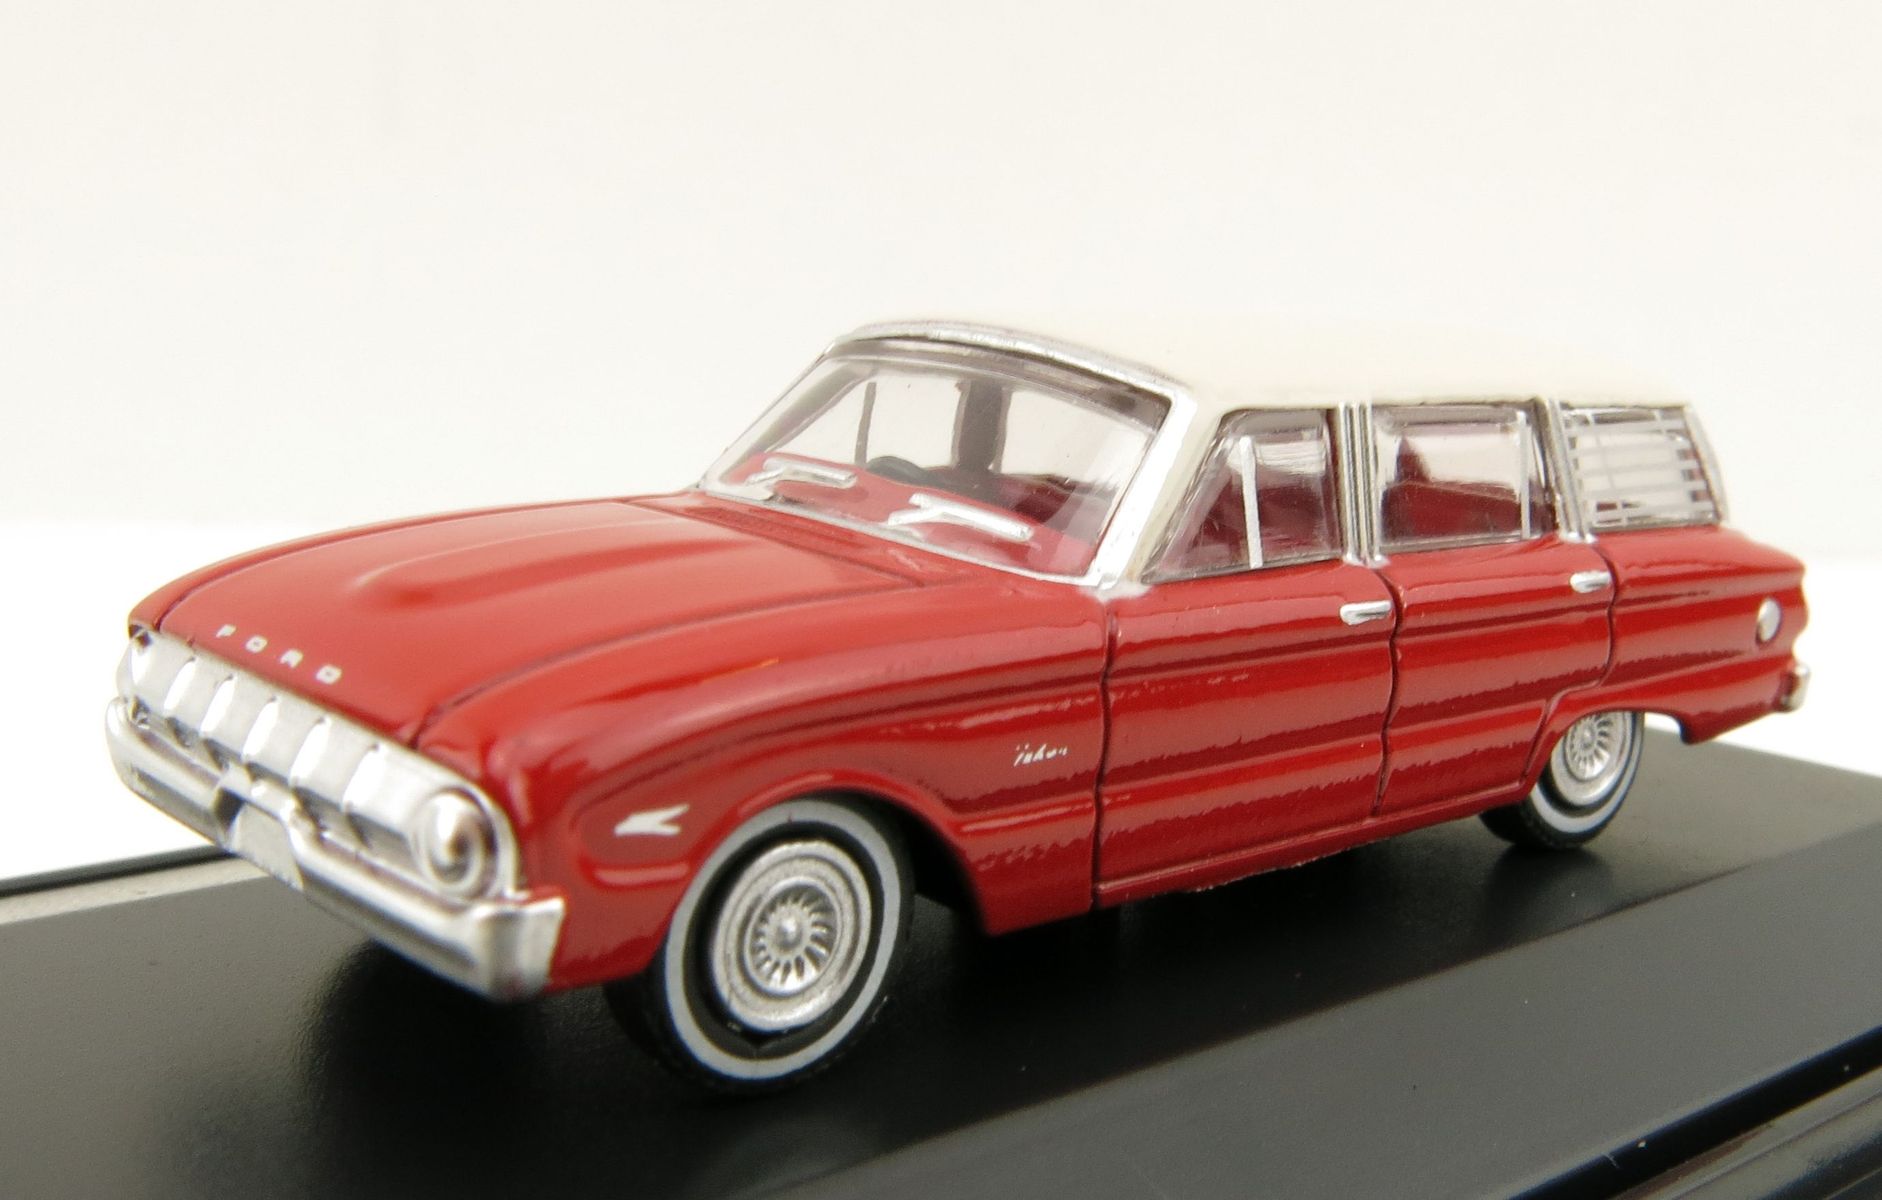 Product Image - Road Ragers - Australian 1962 Ford XL Falcon Station Wagon in Woomera Red - H0 Scale 1:87